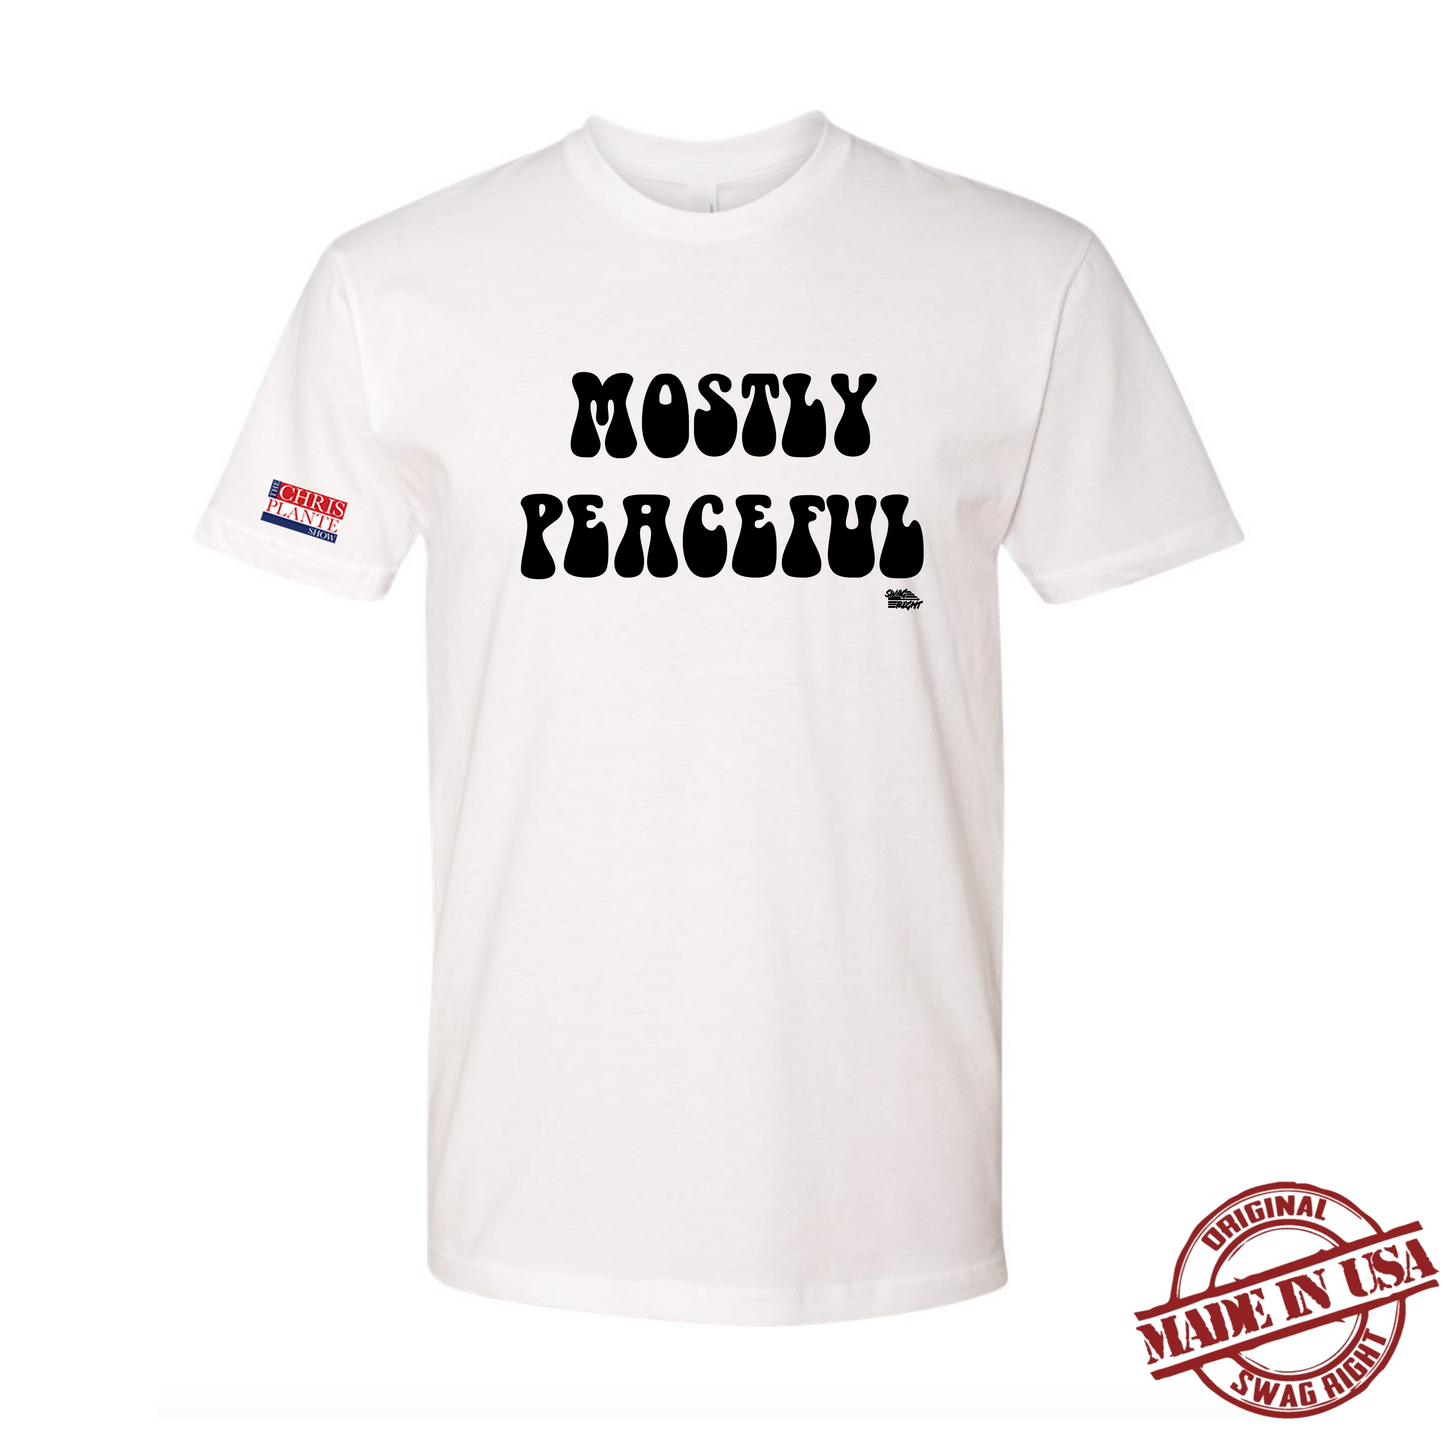 Mostly Peaceful T-Shirt (Red, White)